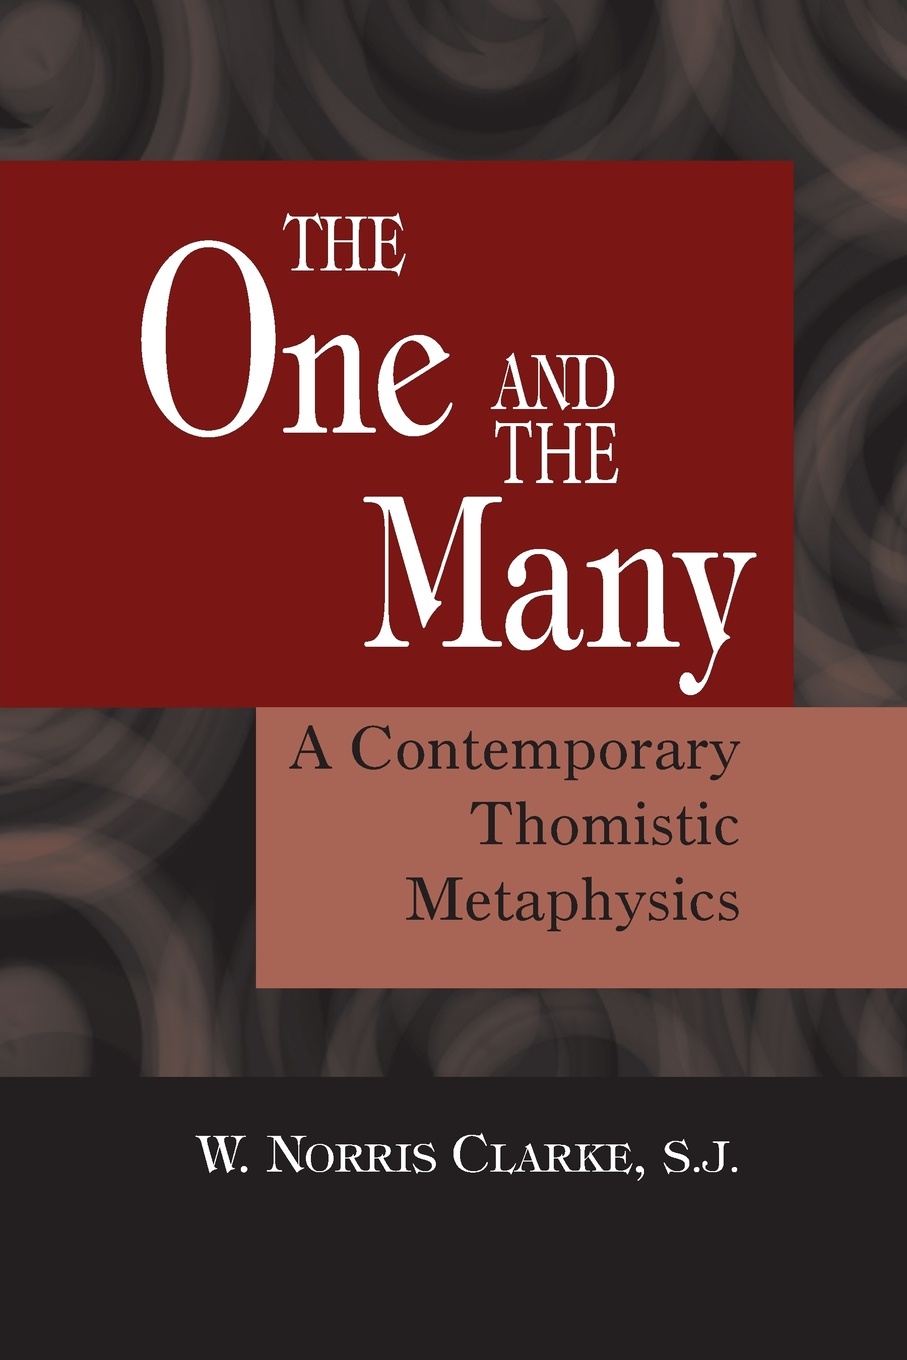 The One and the Many. A Contemporary Thomistic Metaphysics